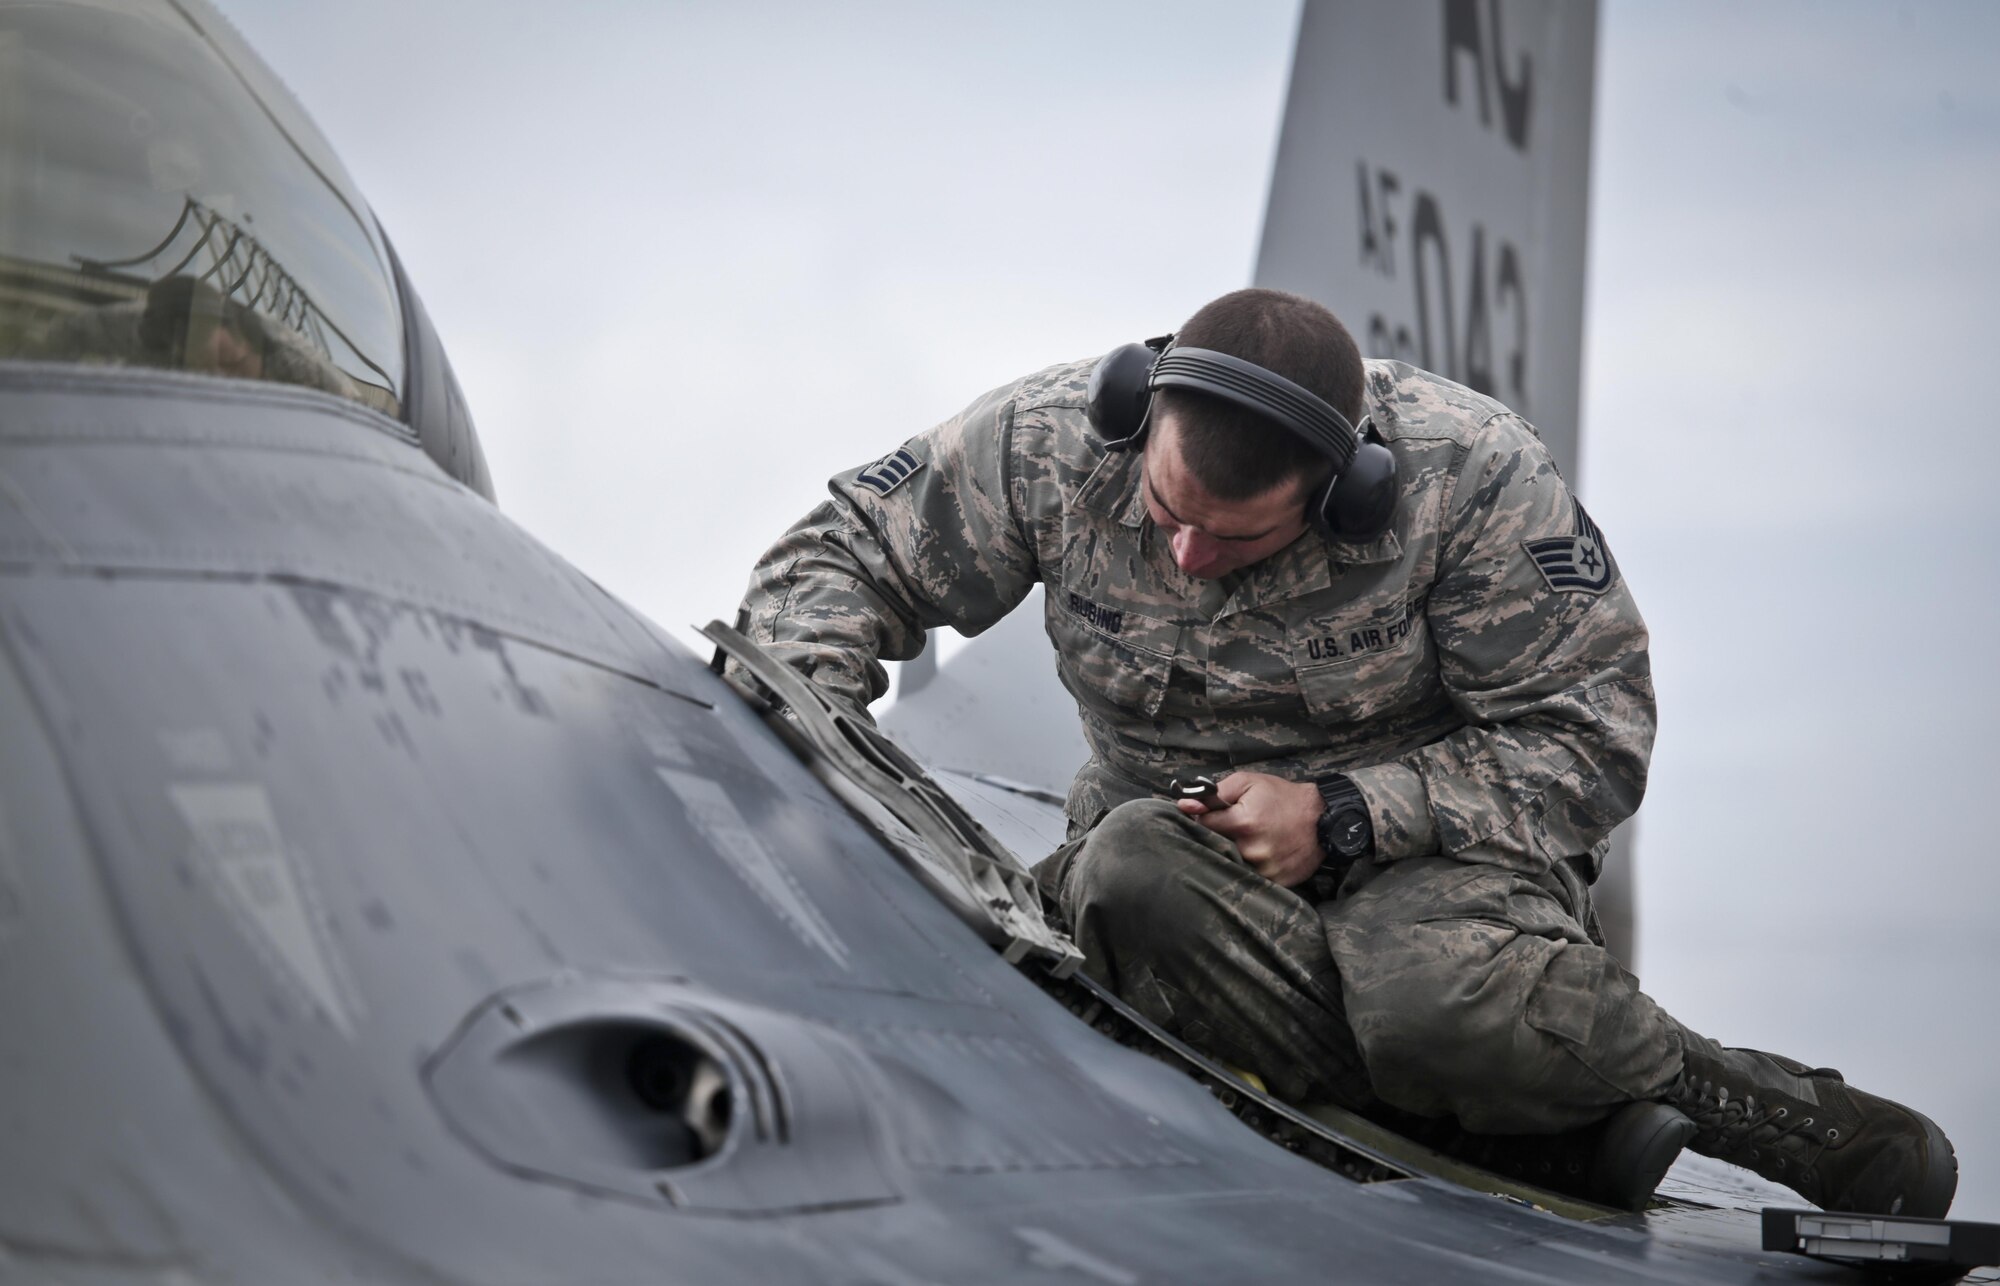 A New Jersey National Guard Airman works on an F-16D Fighting Falcon from the 177th Fighter Wing prior to a mission during a three-day Aeropsace Control Alert CrossTell live-fly training exercise at Atlantic City Air National Guard Base, N.J., May 24, 2017. Representatives from the Air National Guard fighter wings, Civil Air Patrol, and U.S. Coast Guard rotary-wing air intercept units will conduct daily sorties from May 23-25 to hone their skills with tactical-level air-intercept procedures. (U.S. Air National Guard photo by Master Sgt. Matt Hecht/Released)